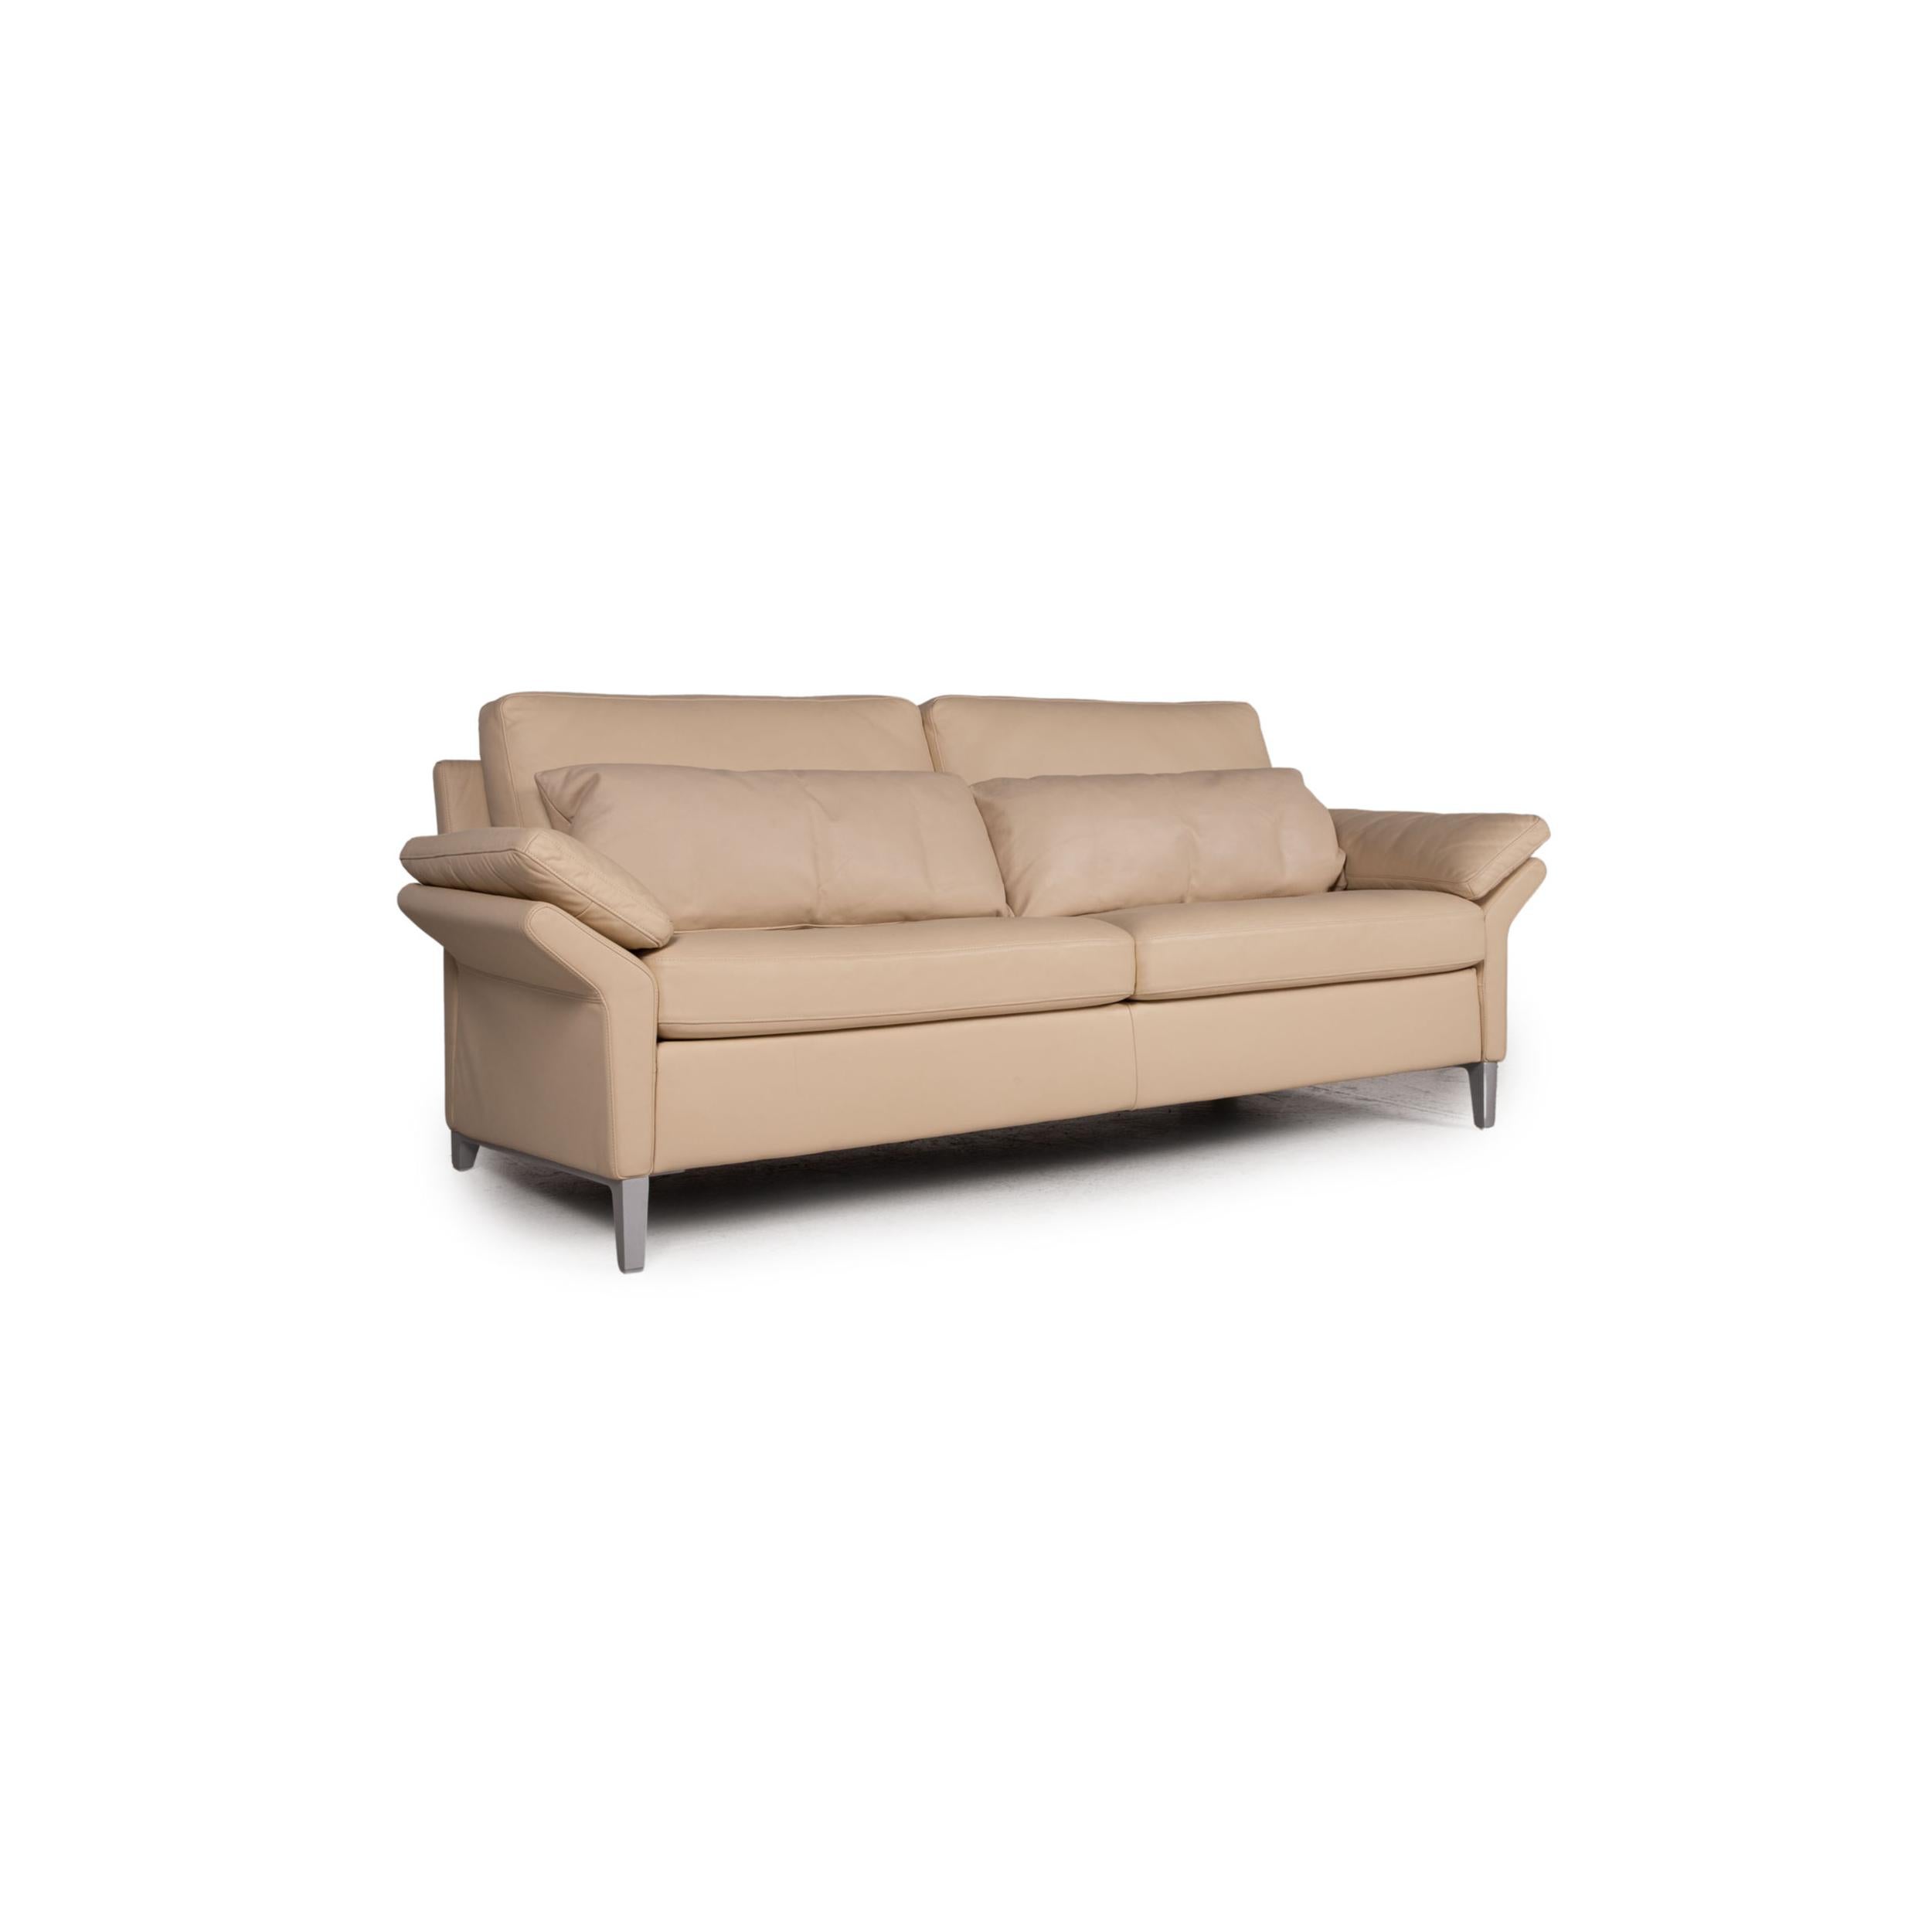 German Rolf Benz 3300 Leather Sofa Cream Three-Seater Couch For Sale